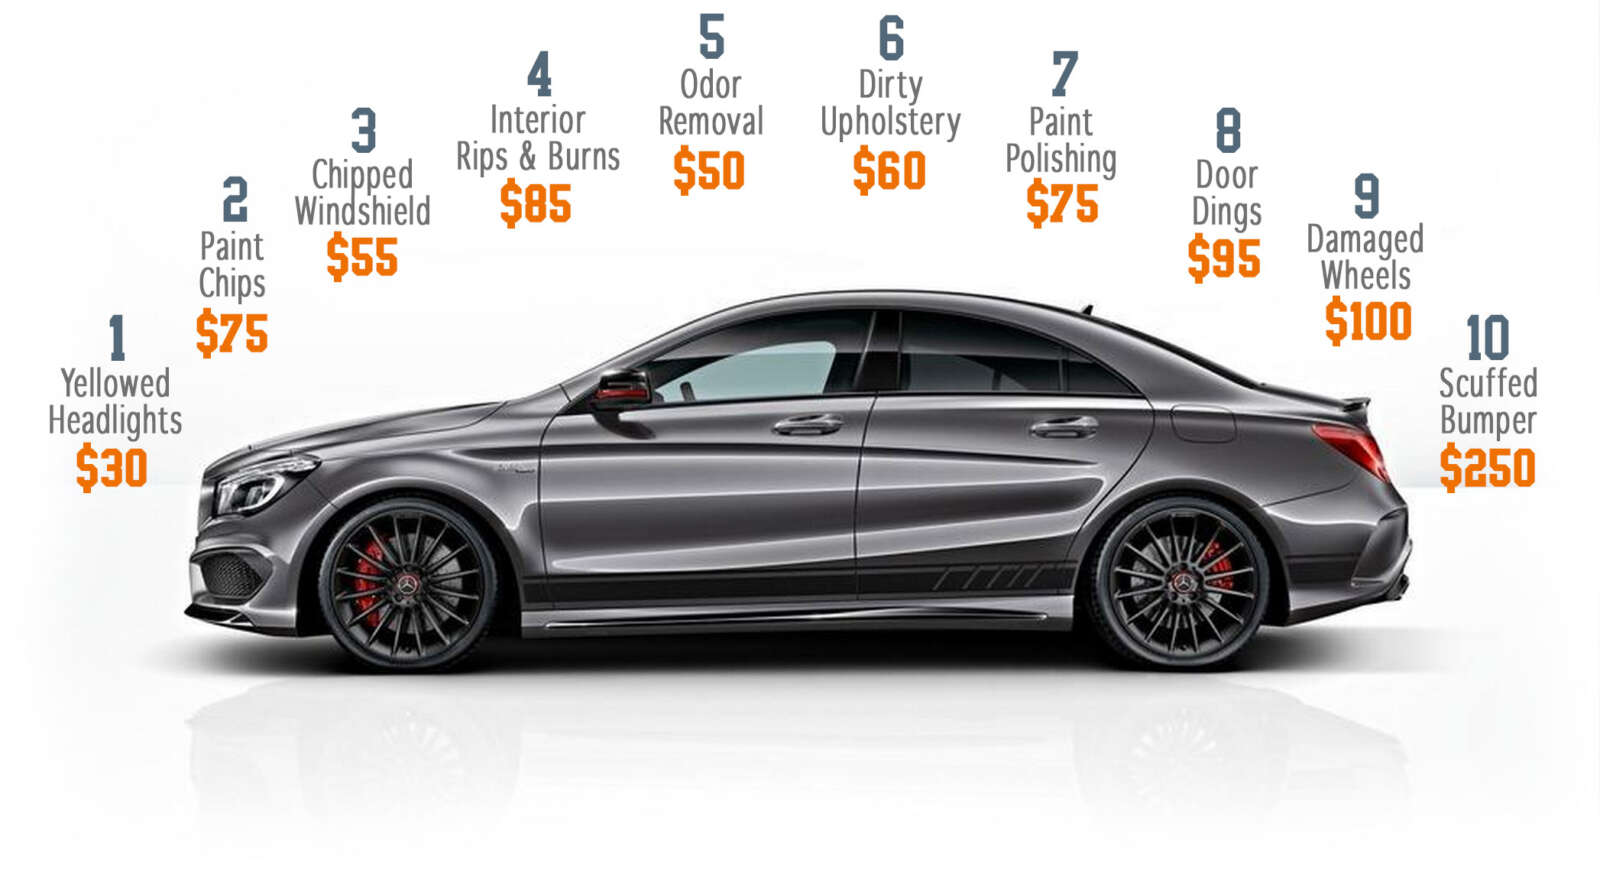 Mercedes benz cla showing the different auto reconditioning add-ons you can learn and charge for.